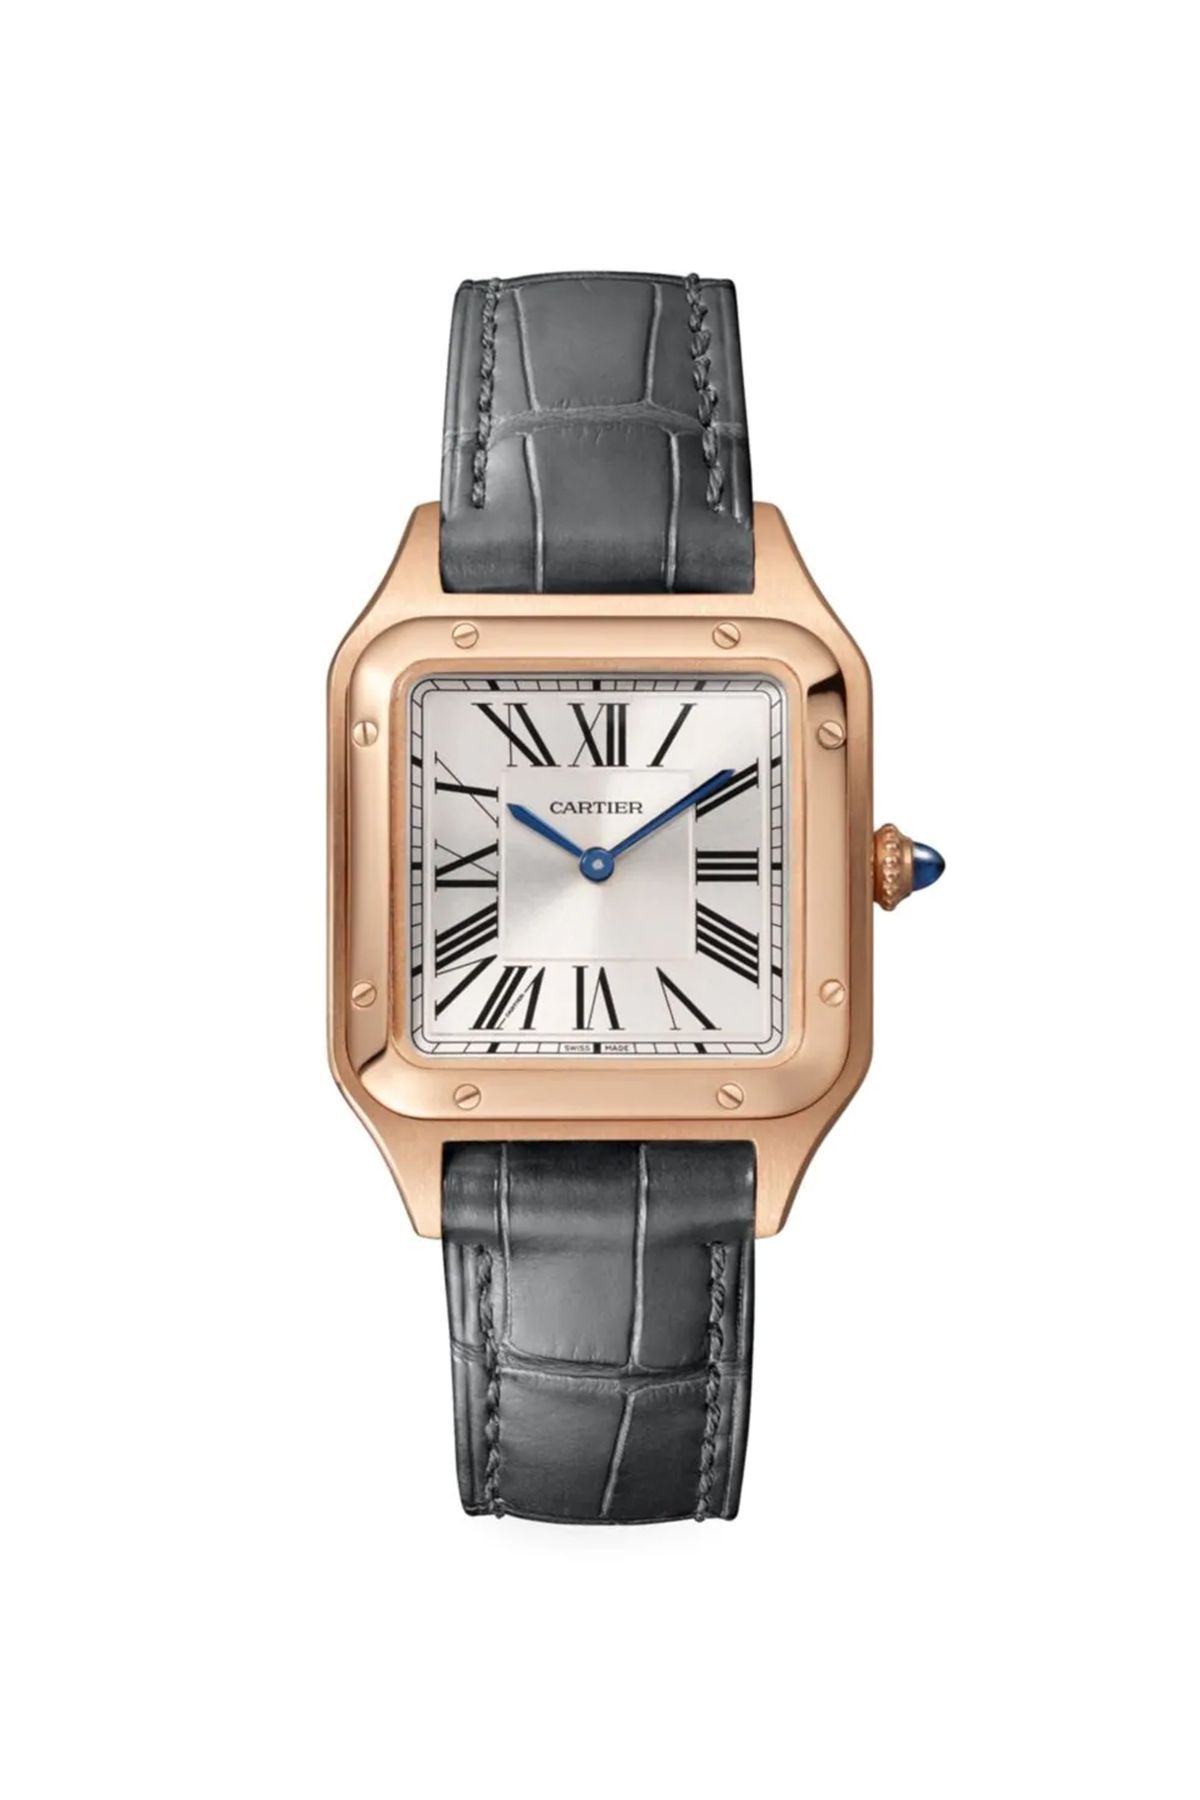 cartier wrist watches for ladies